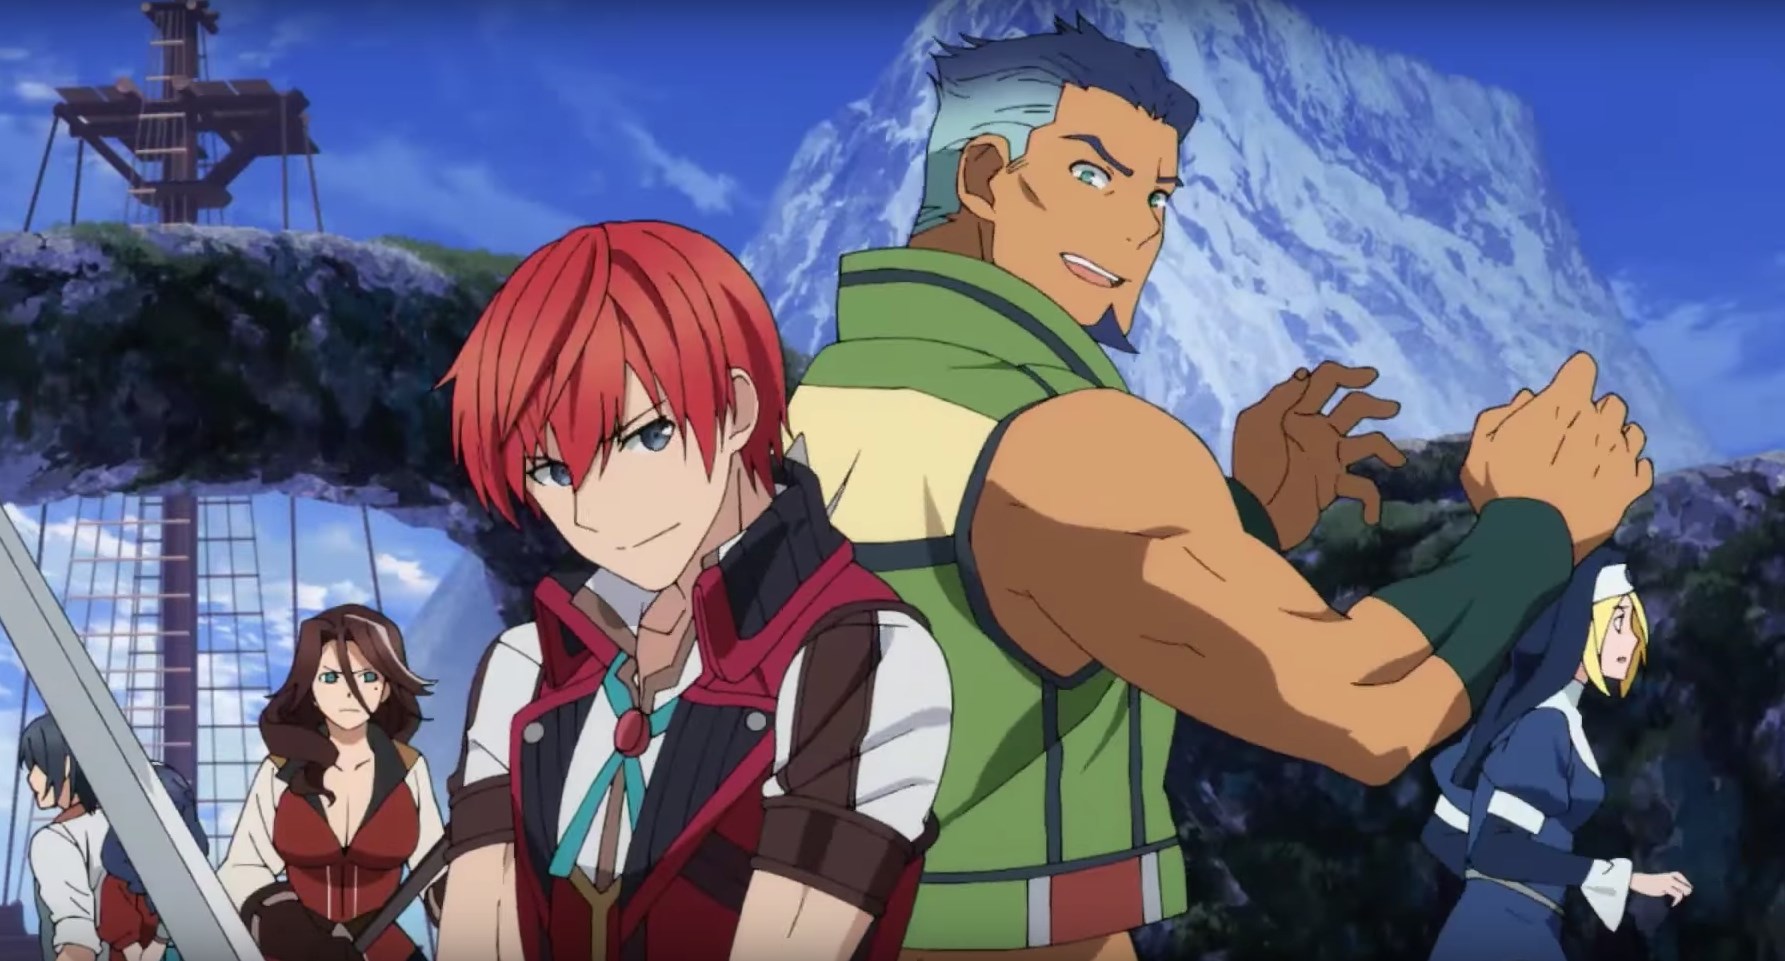 Ys Eight: Lacrimosa of Dana delayed again, won’t be out until 2018